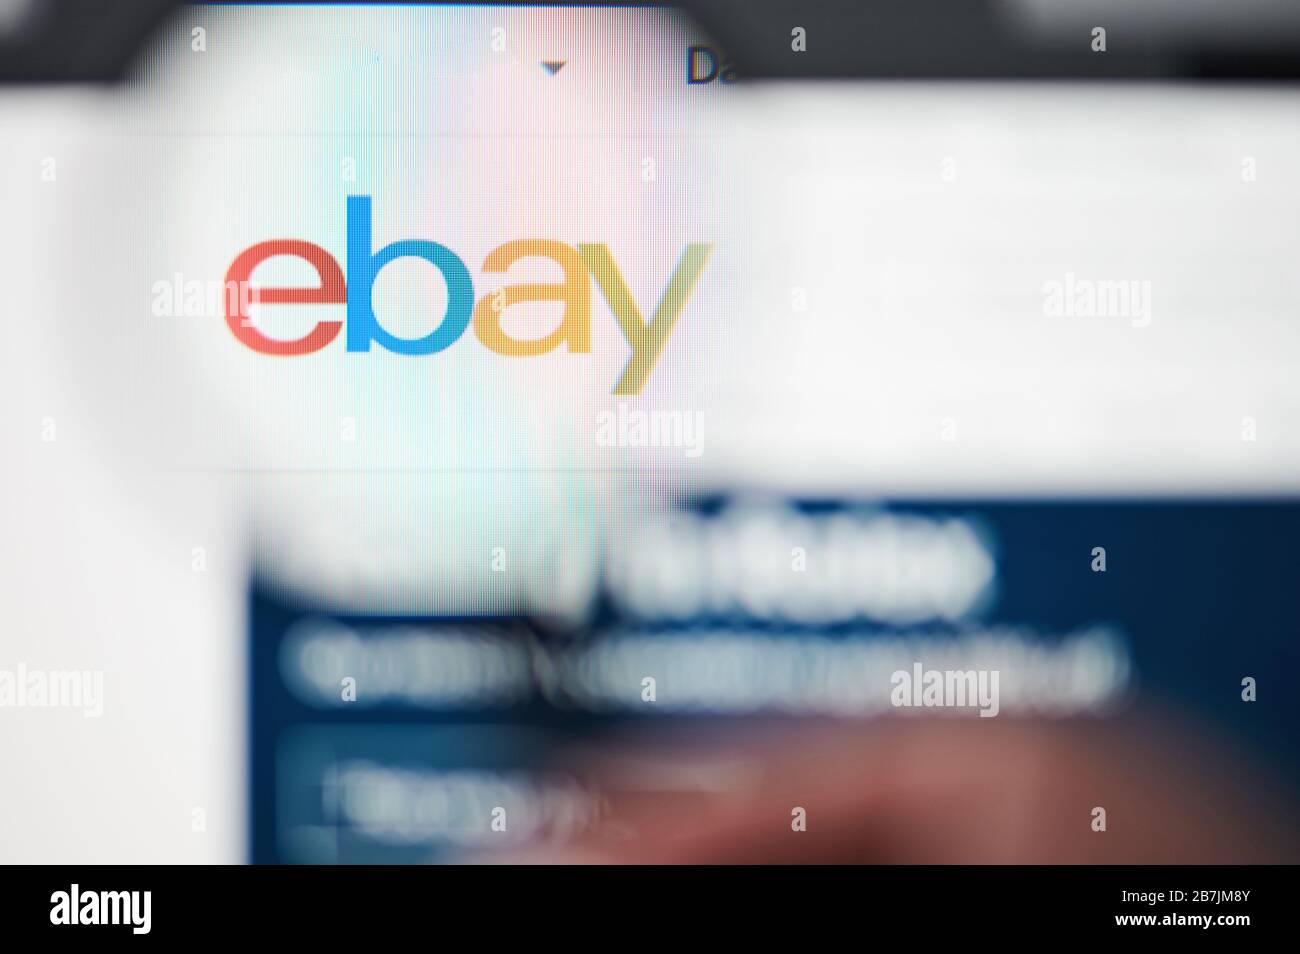 New-York , USA - March 13, 2020: Ebay online shopping web page on laptop screen close up view through magnifier Stock Photo